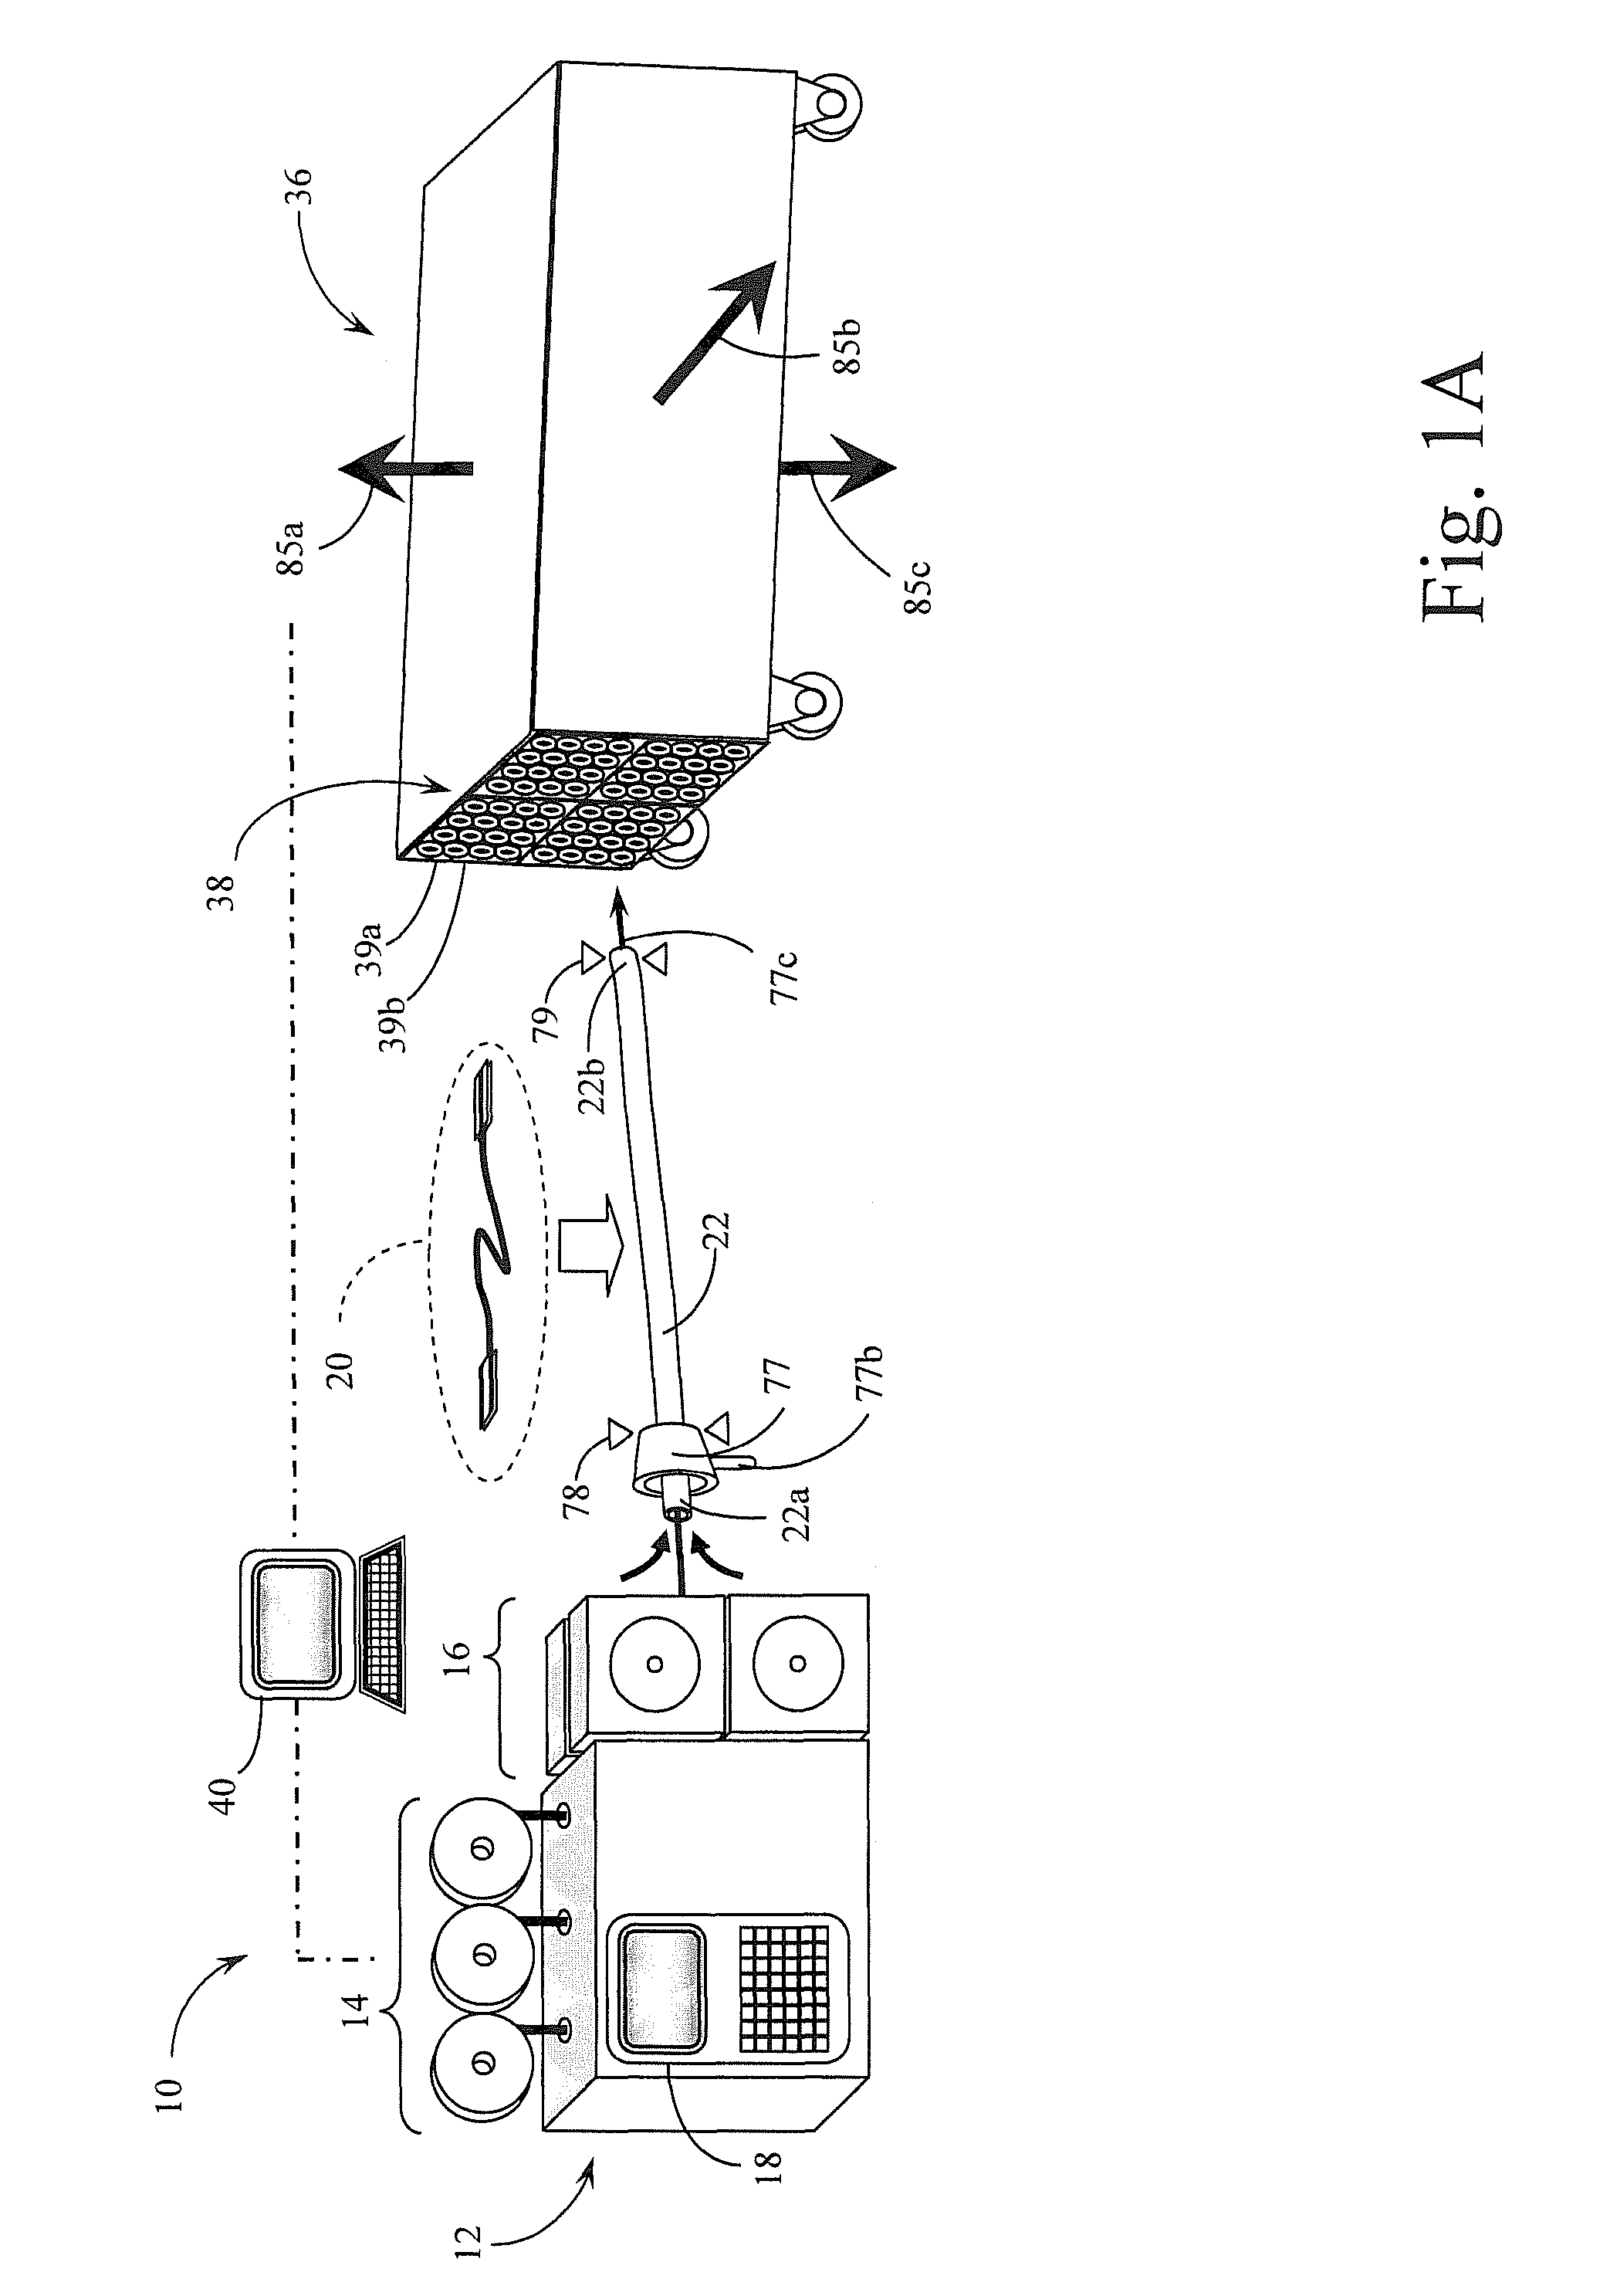 Integrated wire harness batch production systems and methods